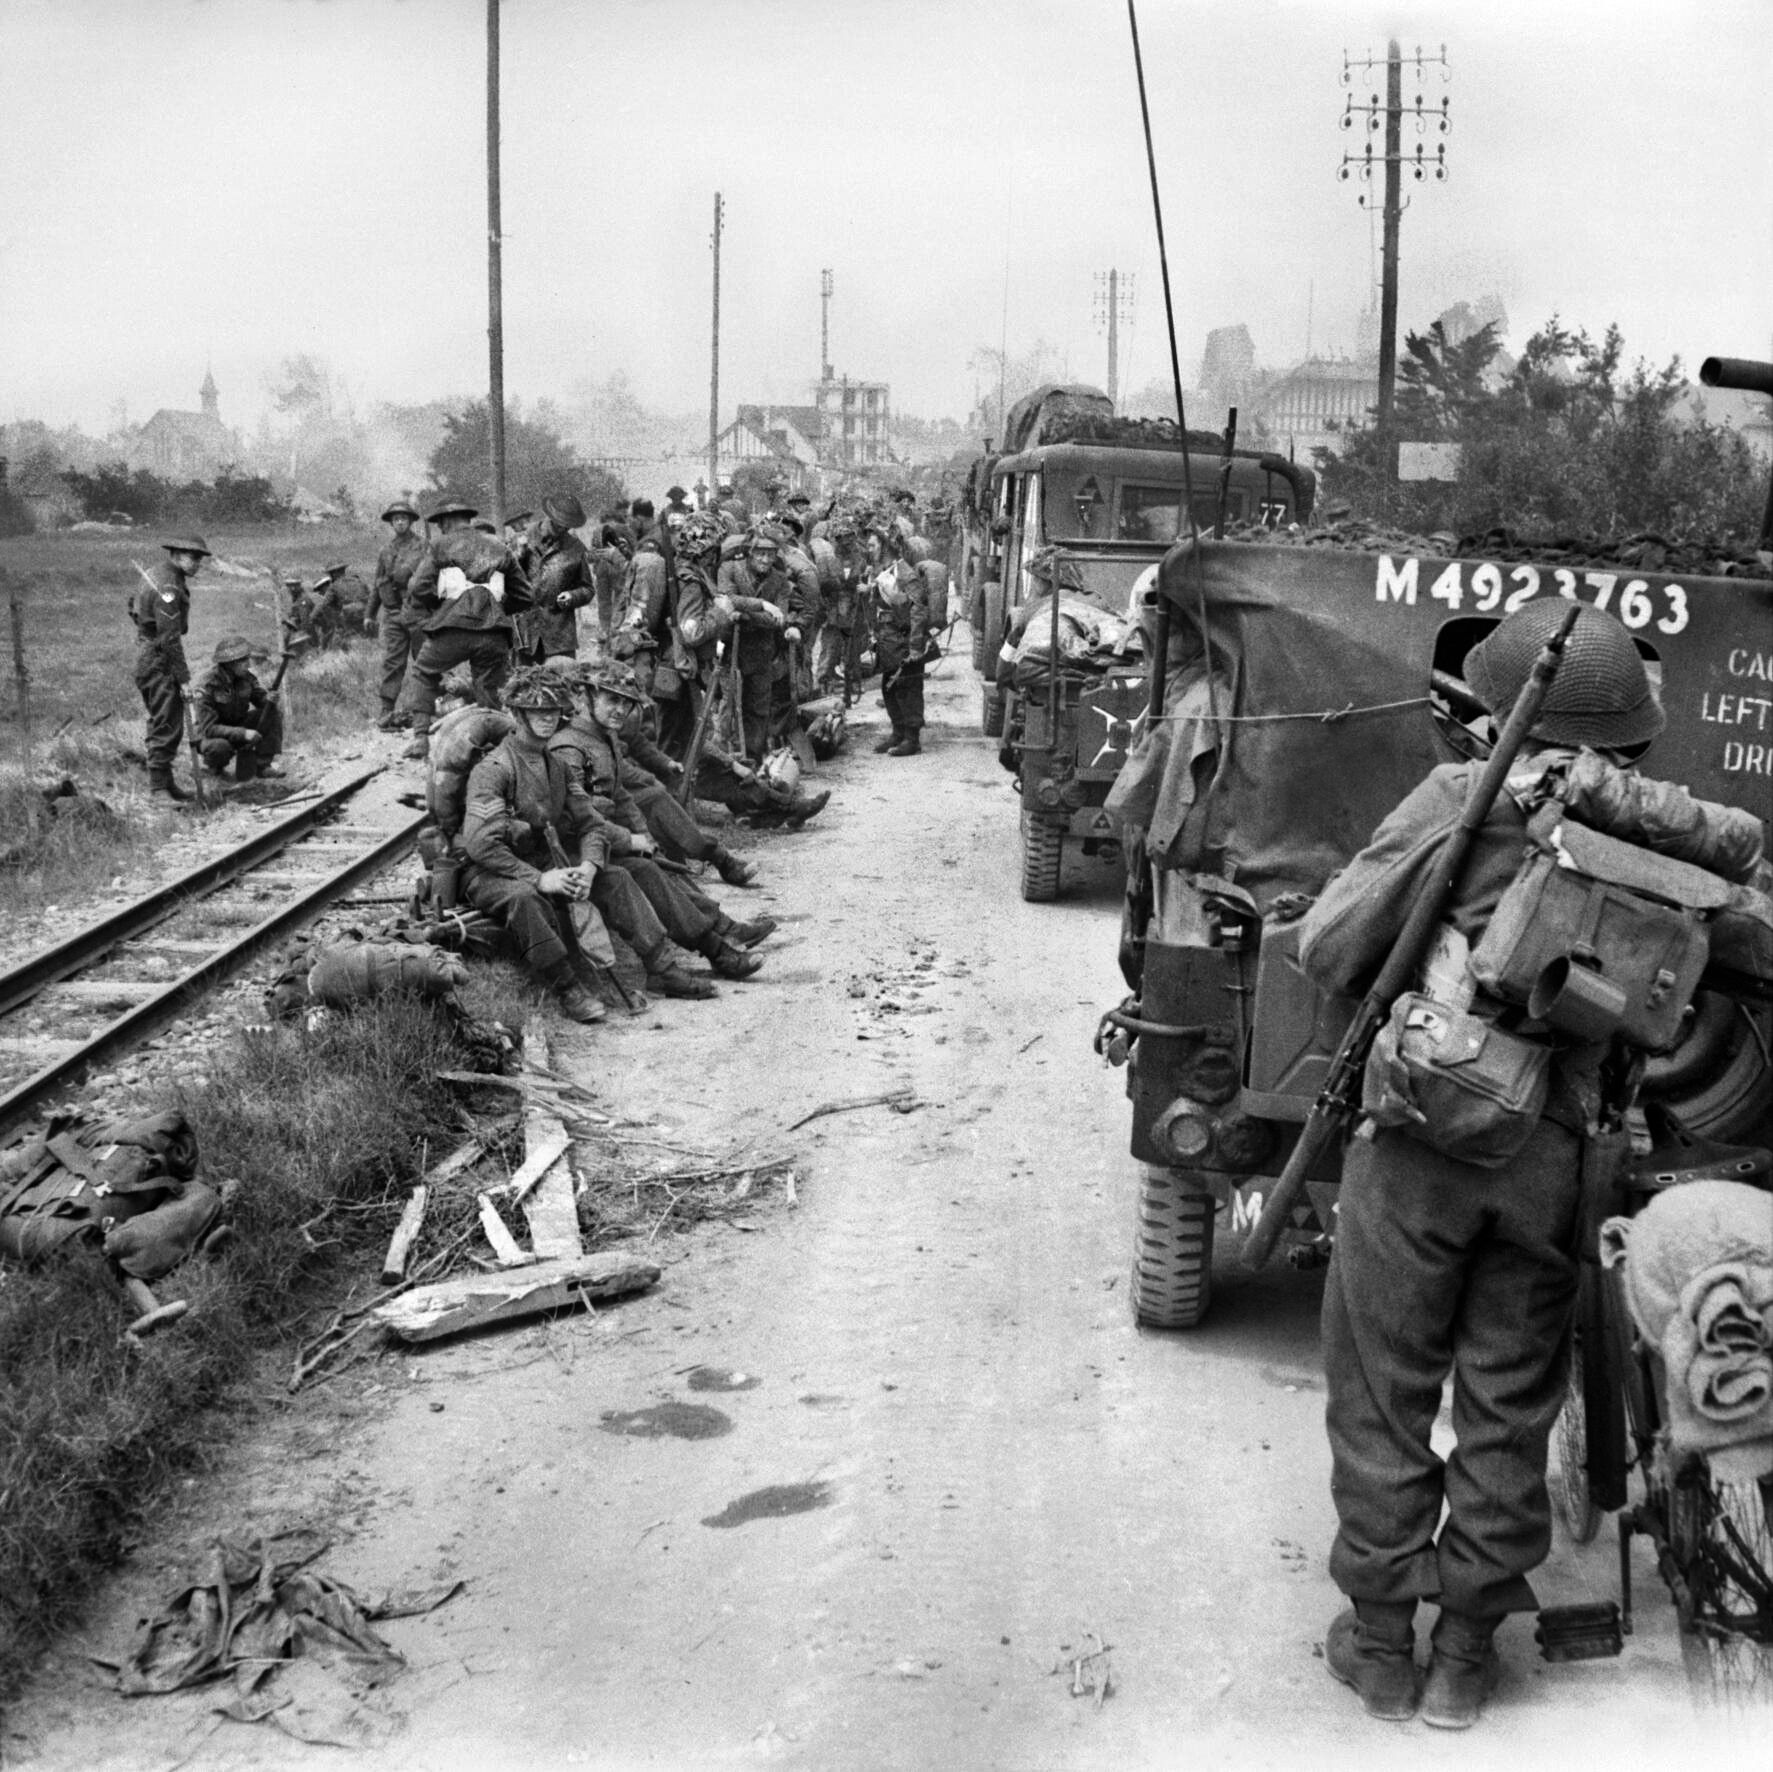 Soldiers of the British 3rd Infantry Division wait alongside their vehicles for orders to move inland on D-Day. Field Marshal Bernard Montgomery was overly optimistic in his assessment that Caen could be taken within hours of landing, and a difficult fight for control of the communications center lay ahead.